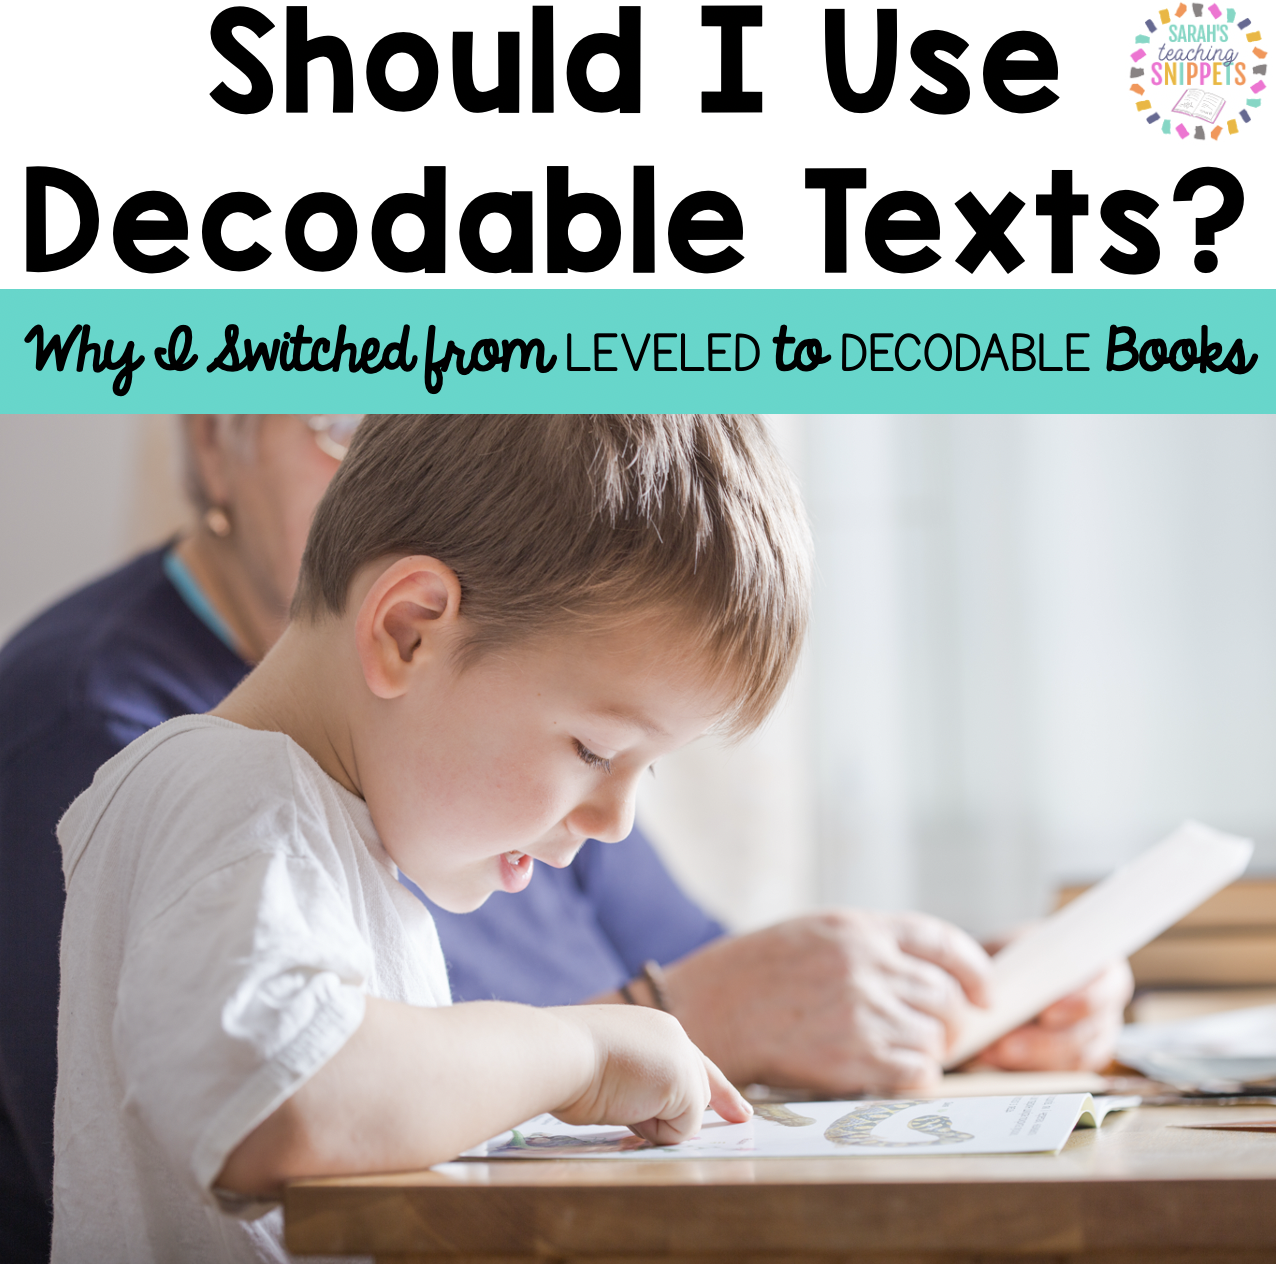 decodable-books-sarah-s-teaching-snippets